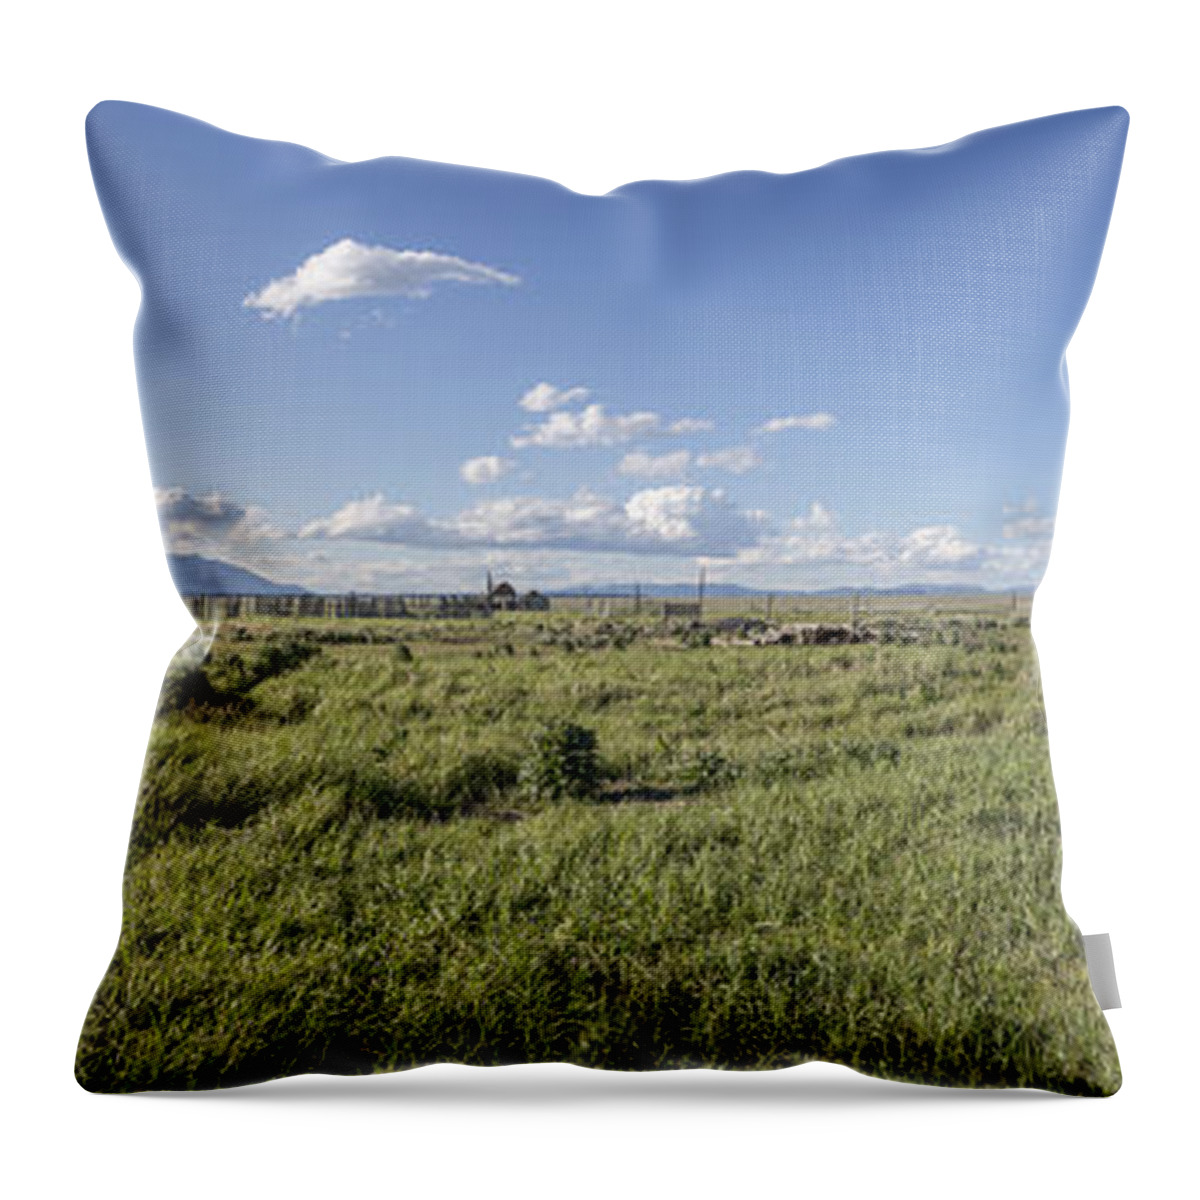 Art Throw Pillow featuring the photograph Going Home by Jon Glaser